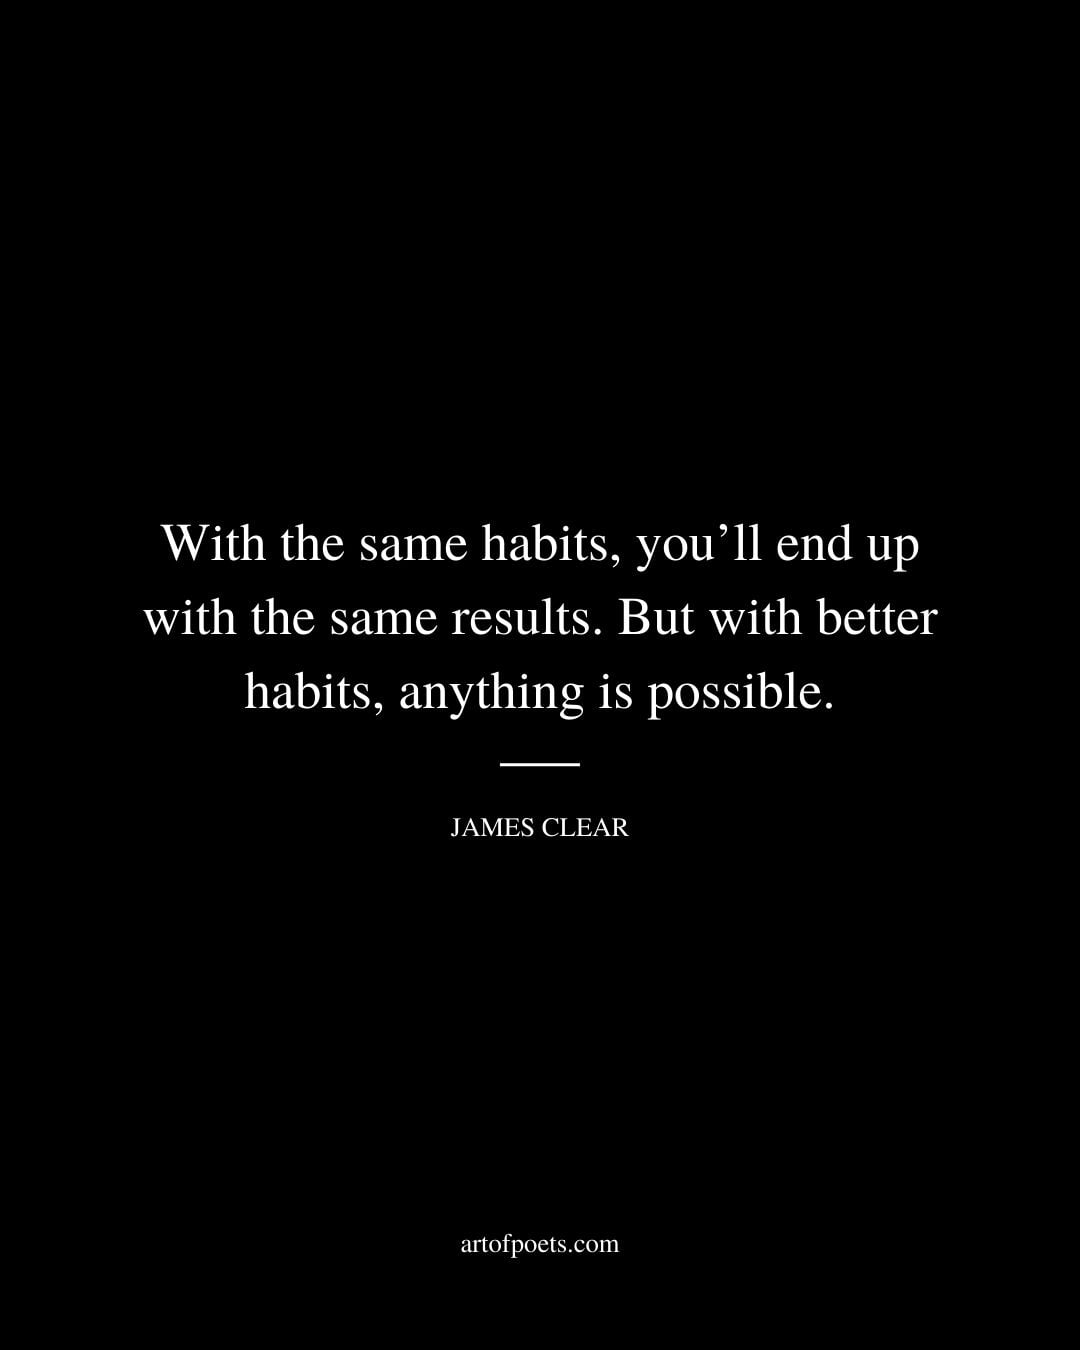 With the same habits youll end up with the same results. But with better habits anything is possible